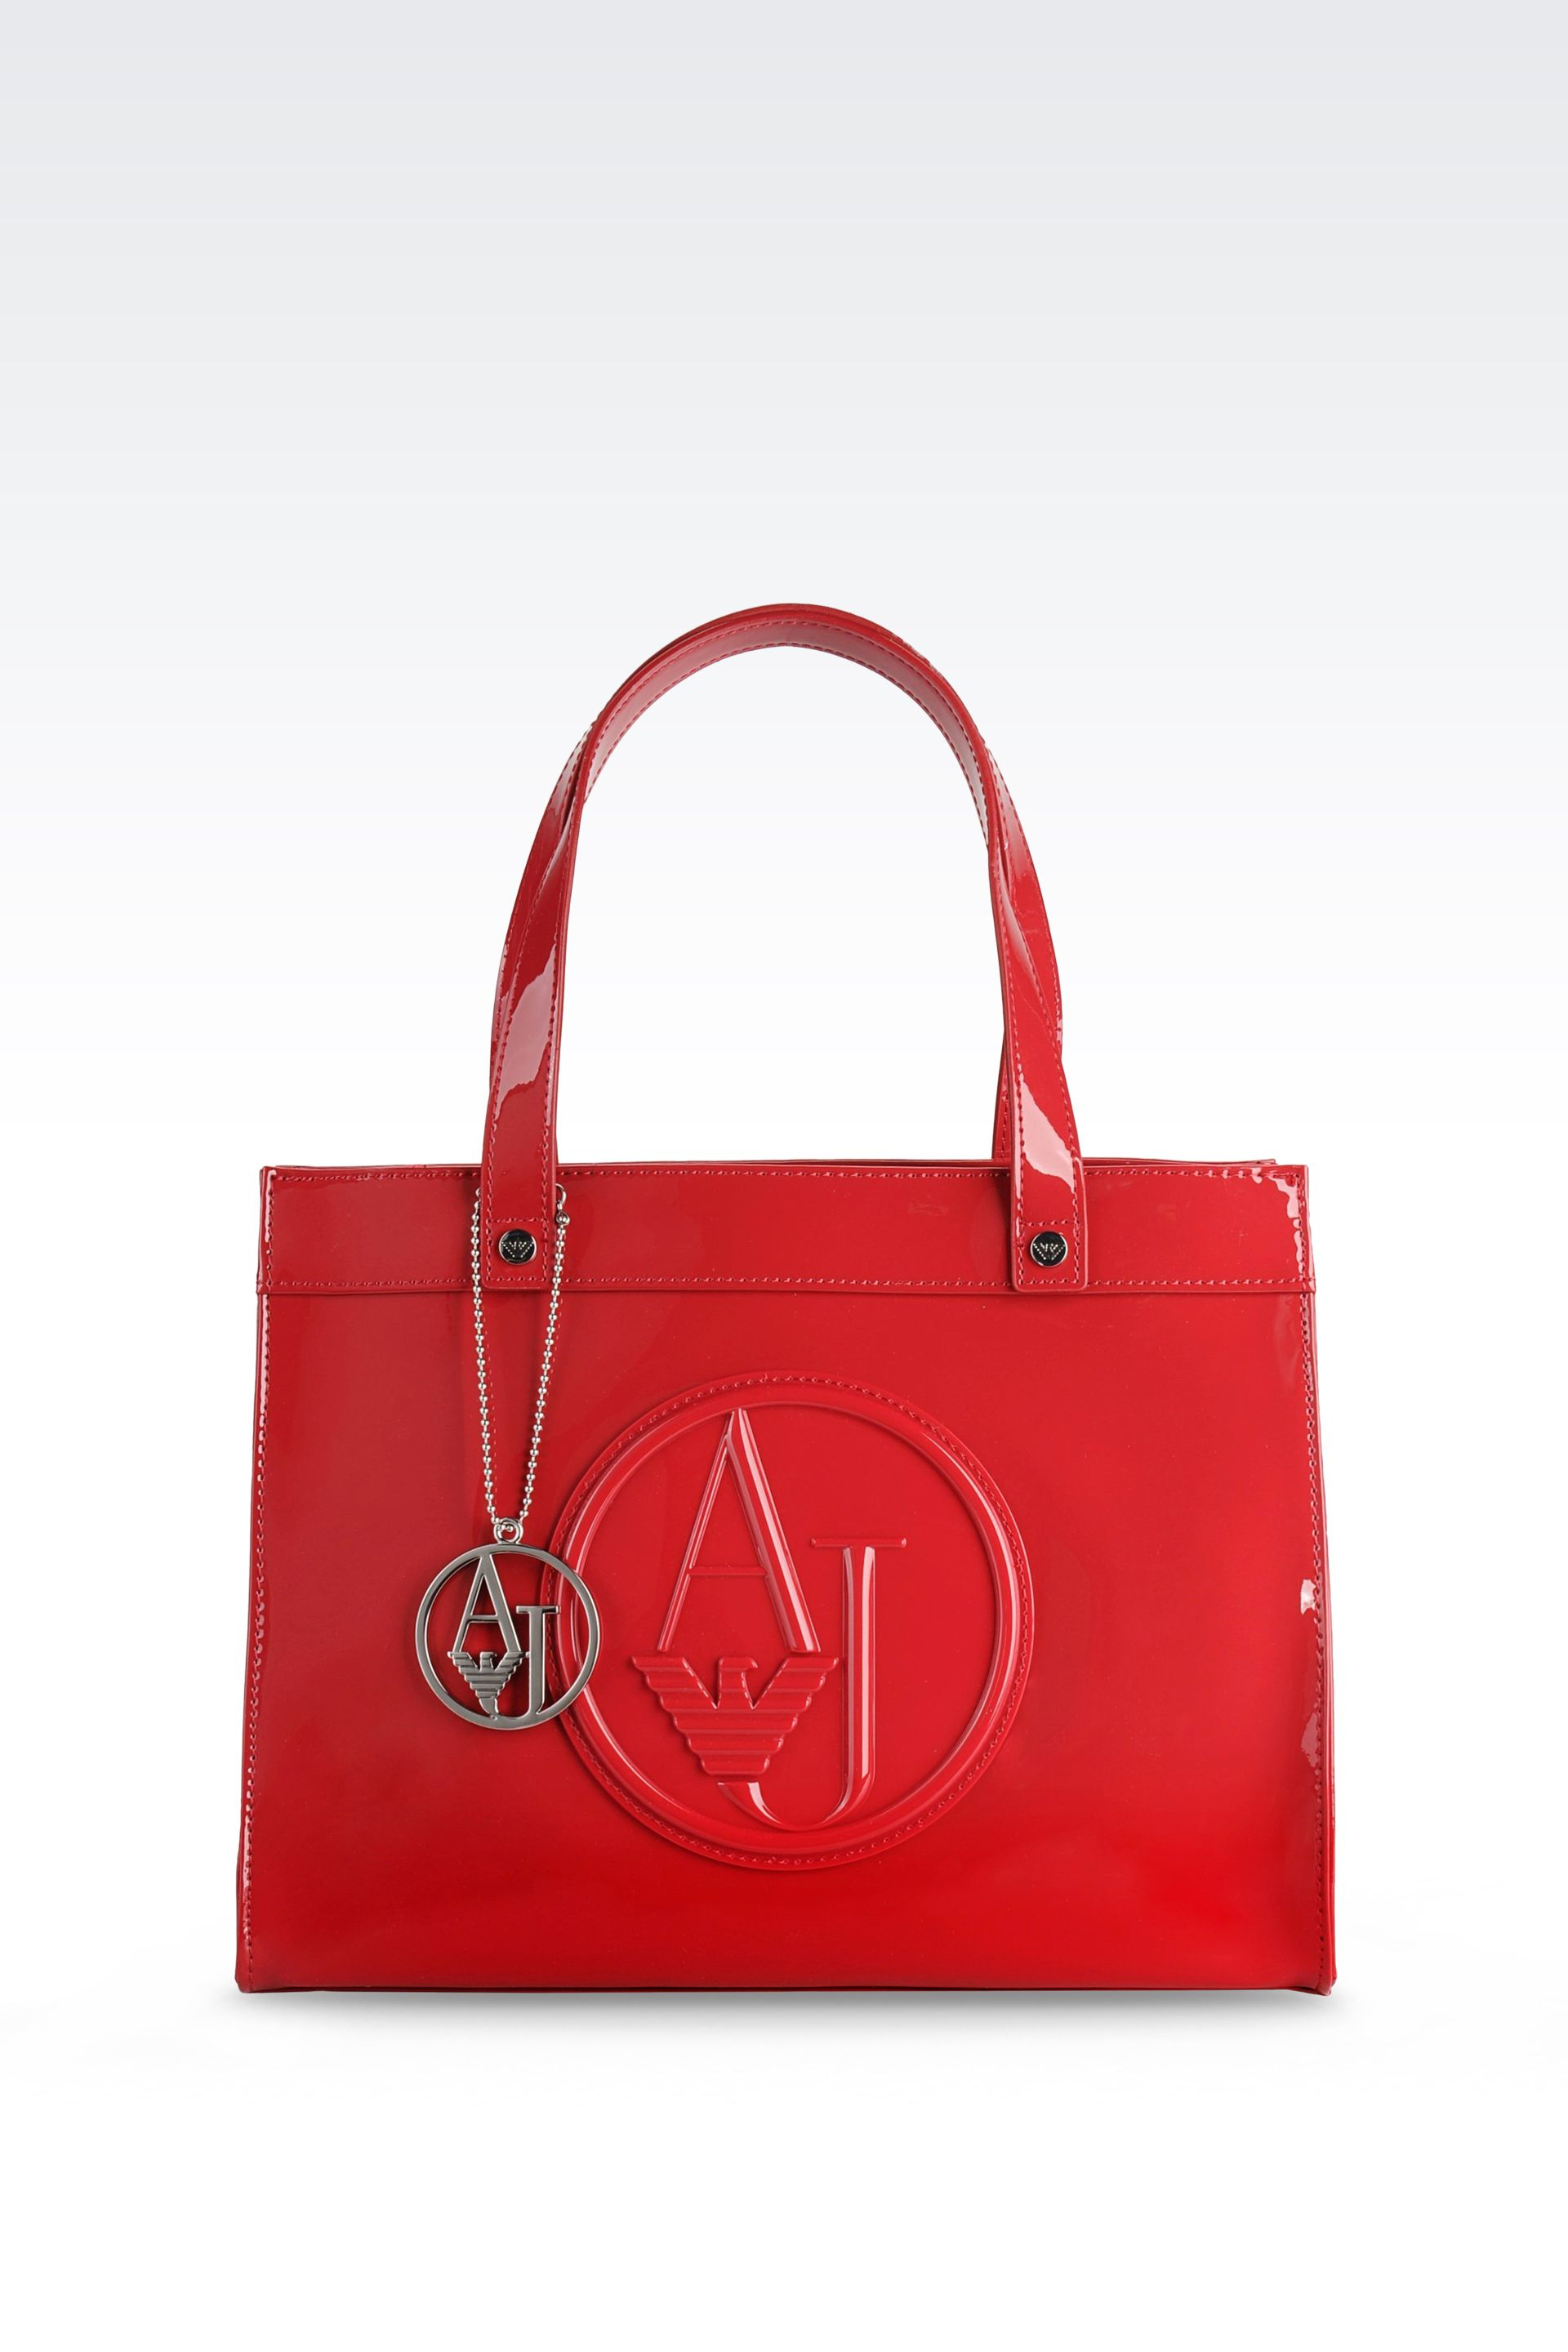 Armani Jeans Trimmed Tote Bag In Red | islamiyyat.com